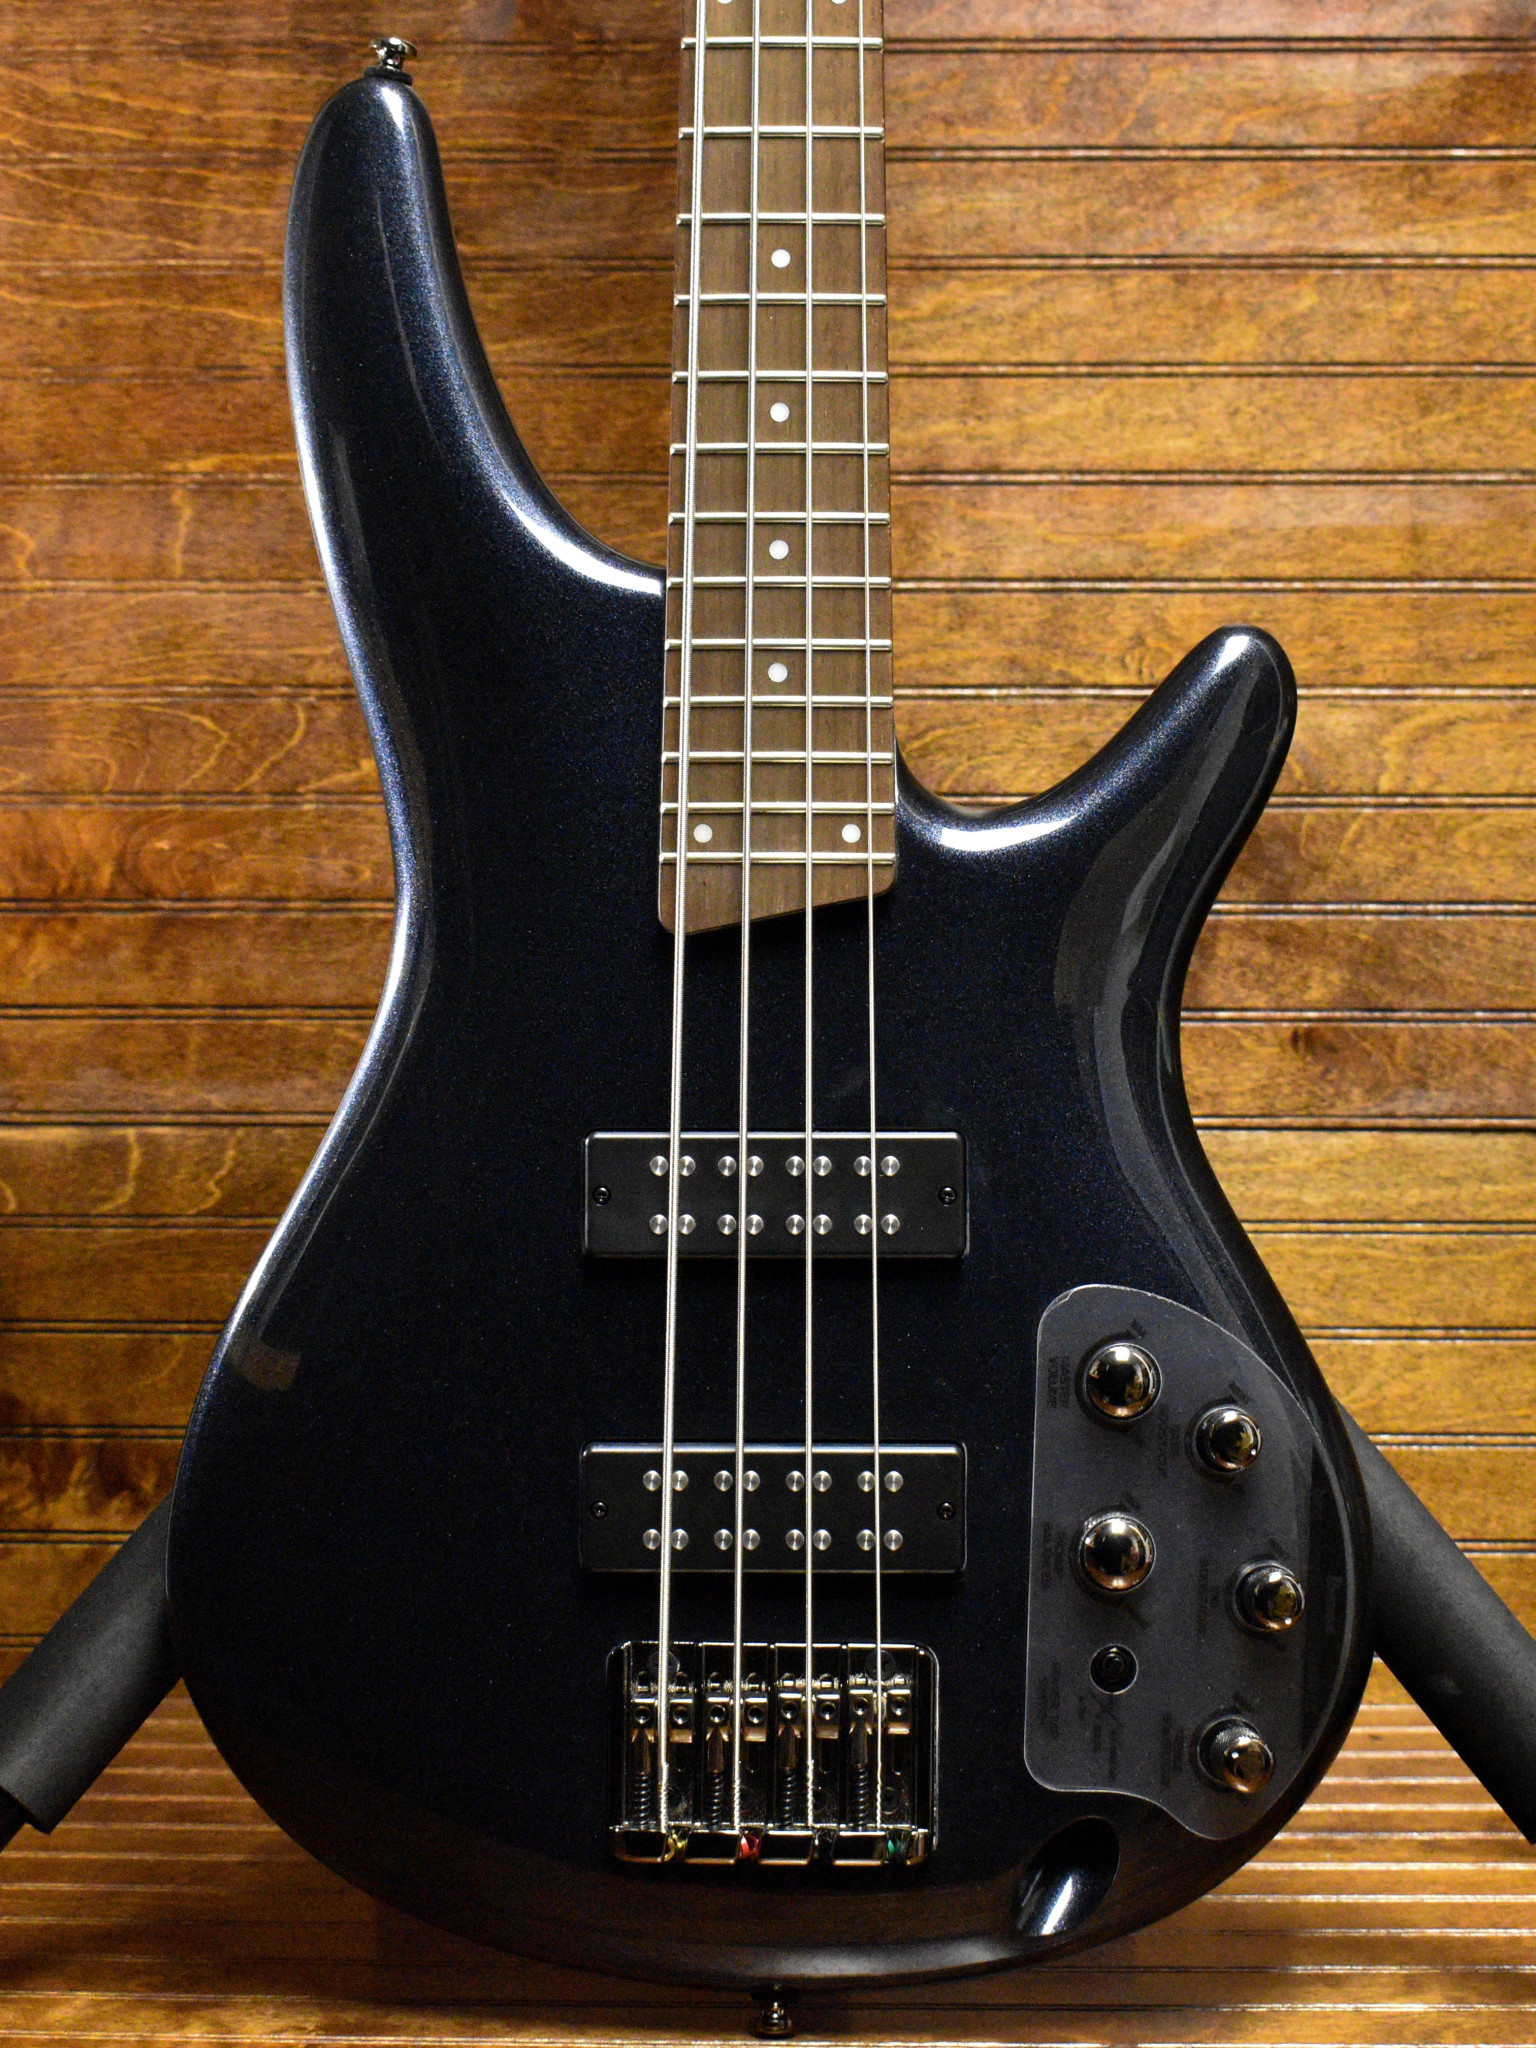 Ibanez Ibanez SR300EIPT Bass Guitar, Iron Pewter - Newell's Music